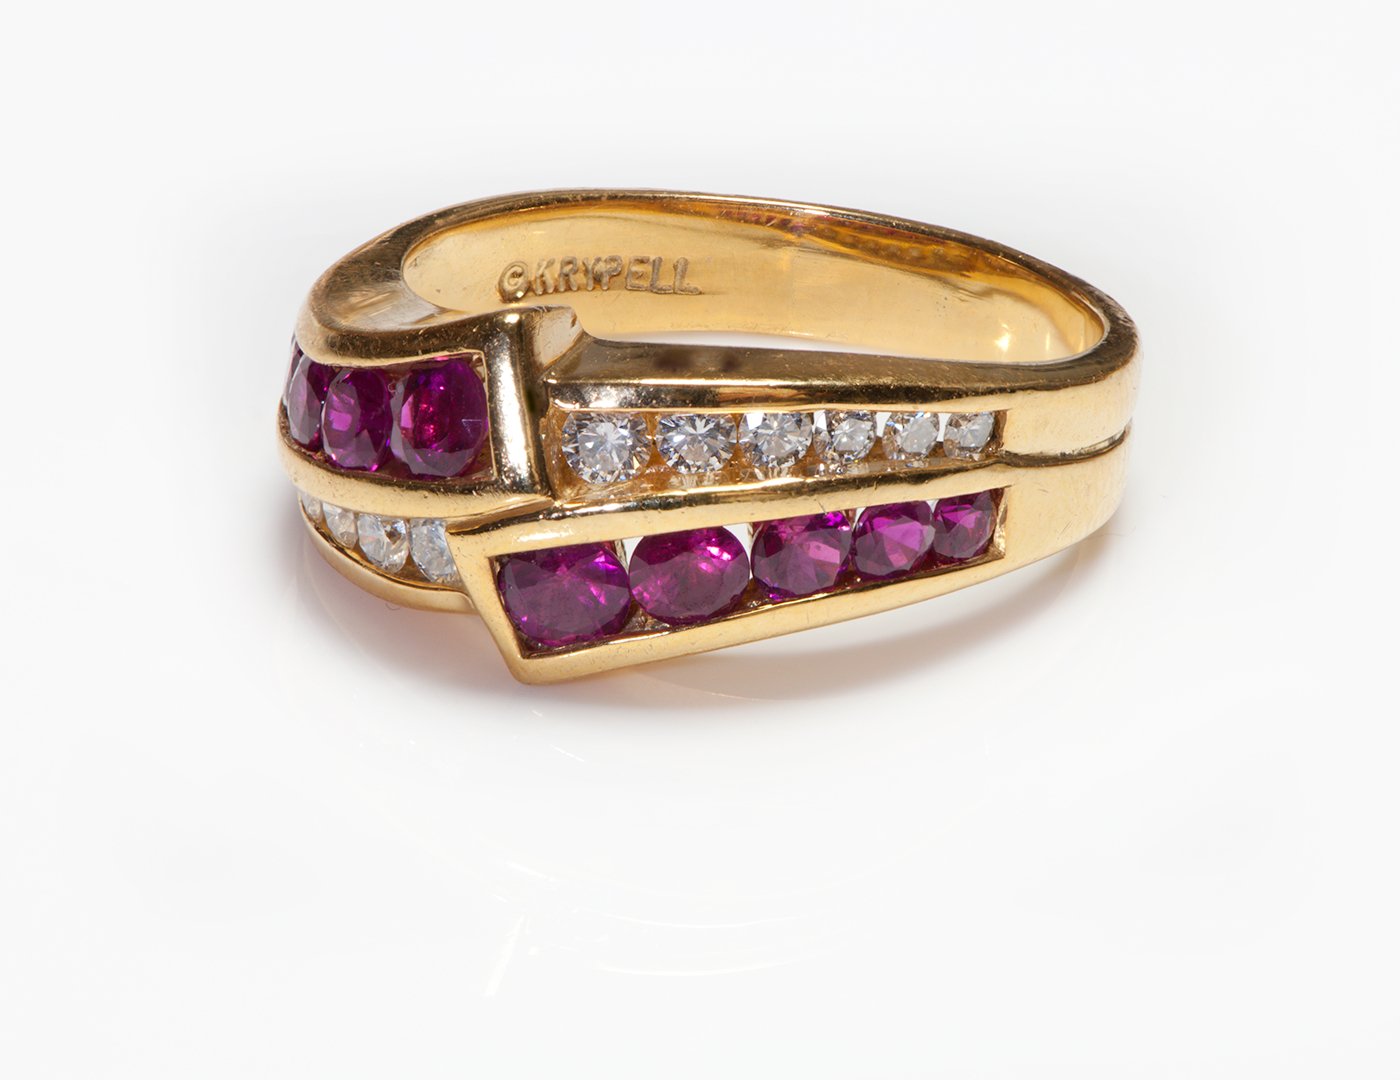 Charles Krypell 18K Gold Ruby Diamond Ring - DSF Antique Jewelry